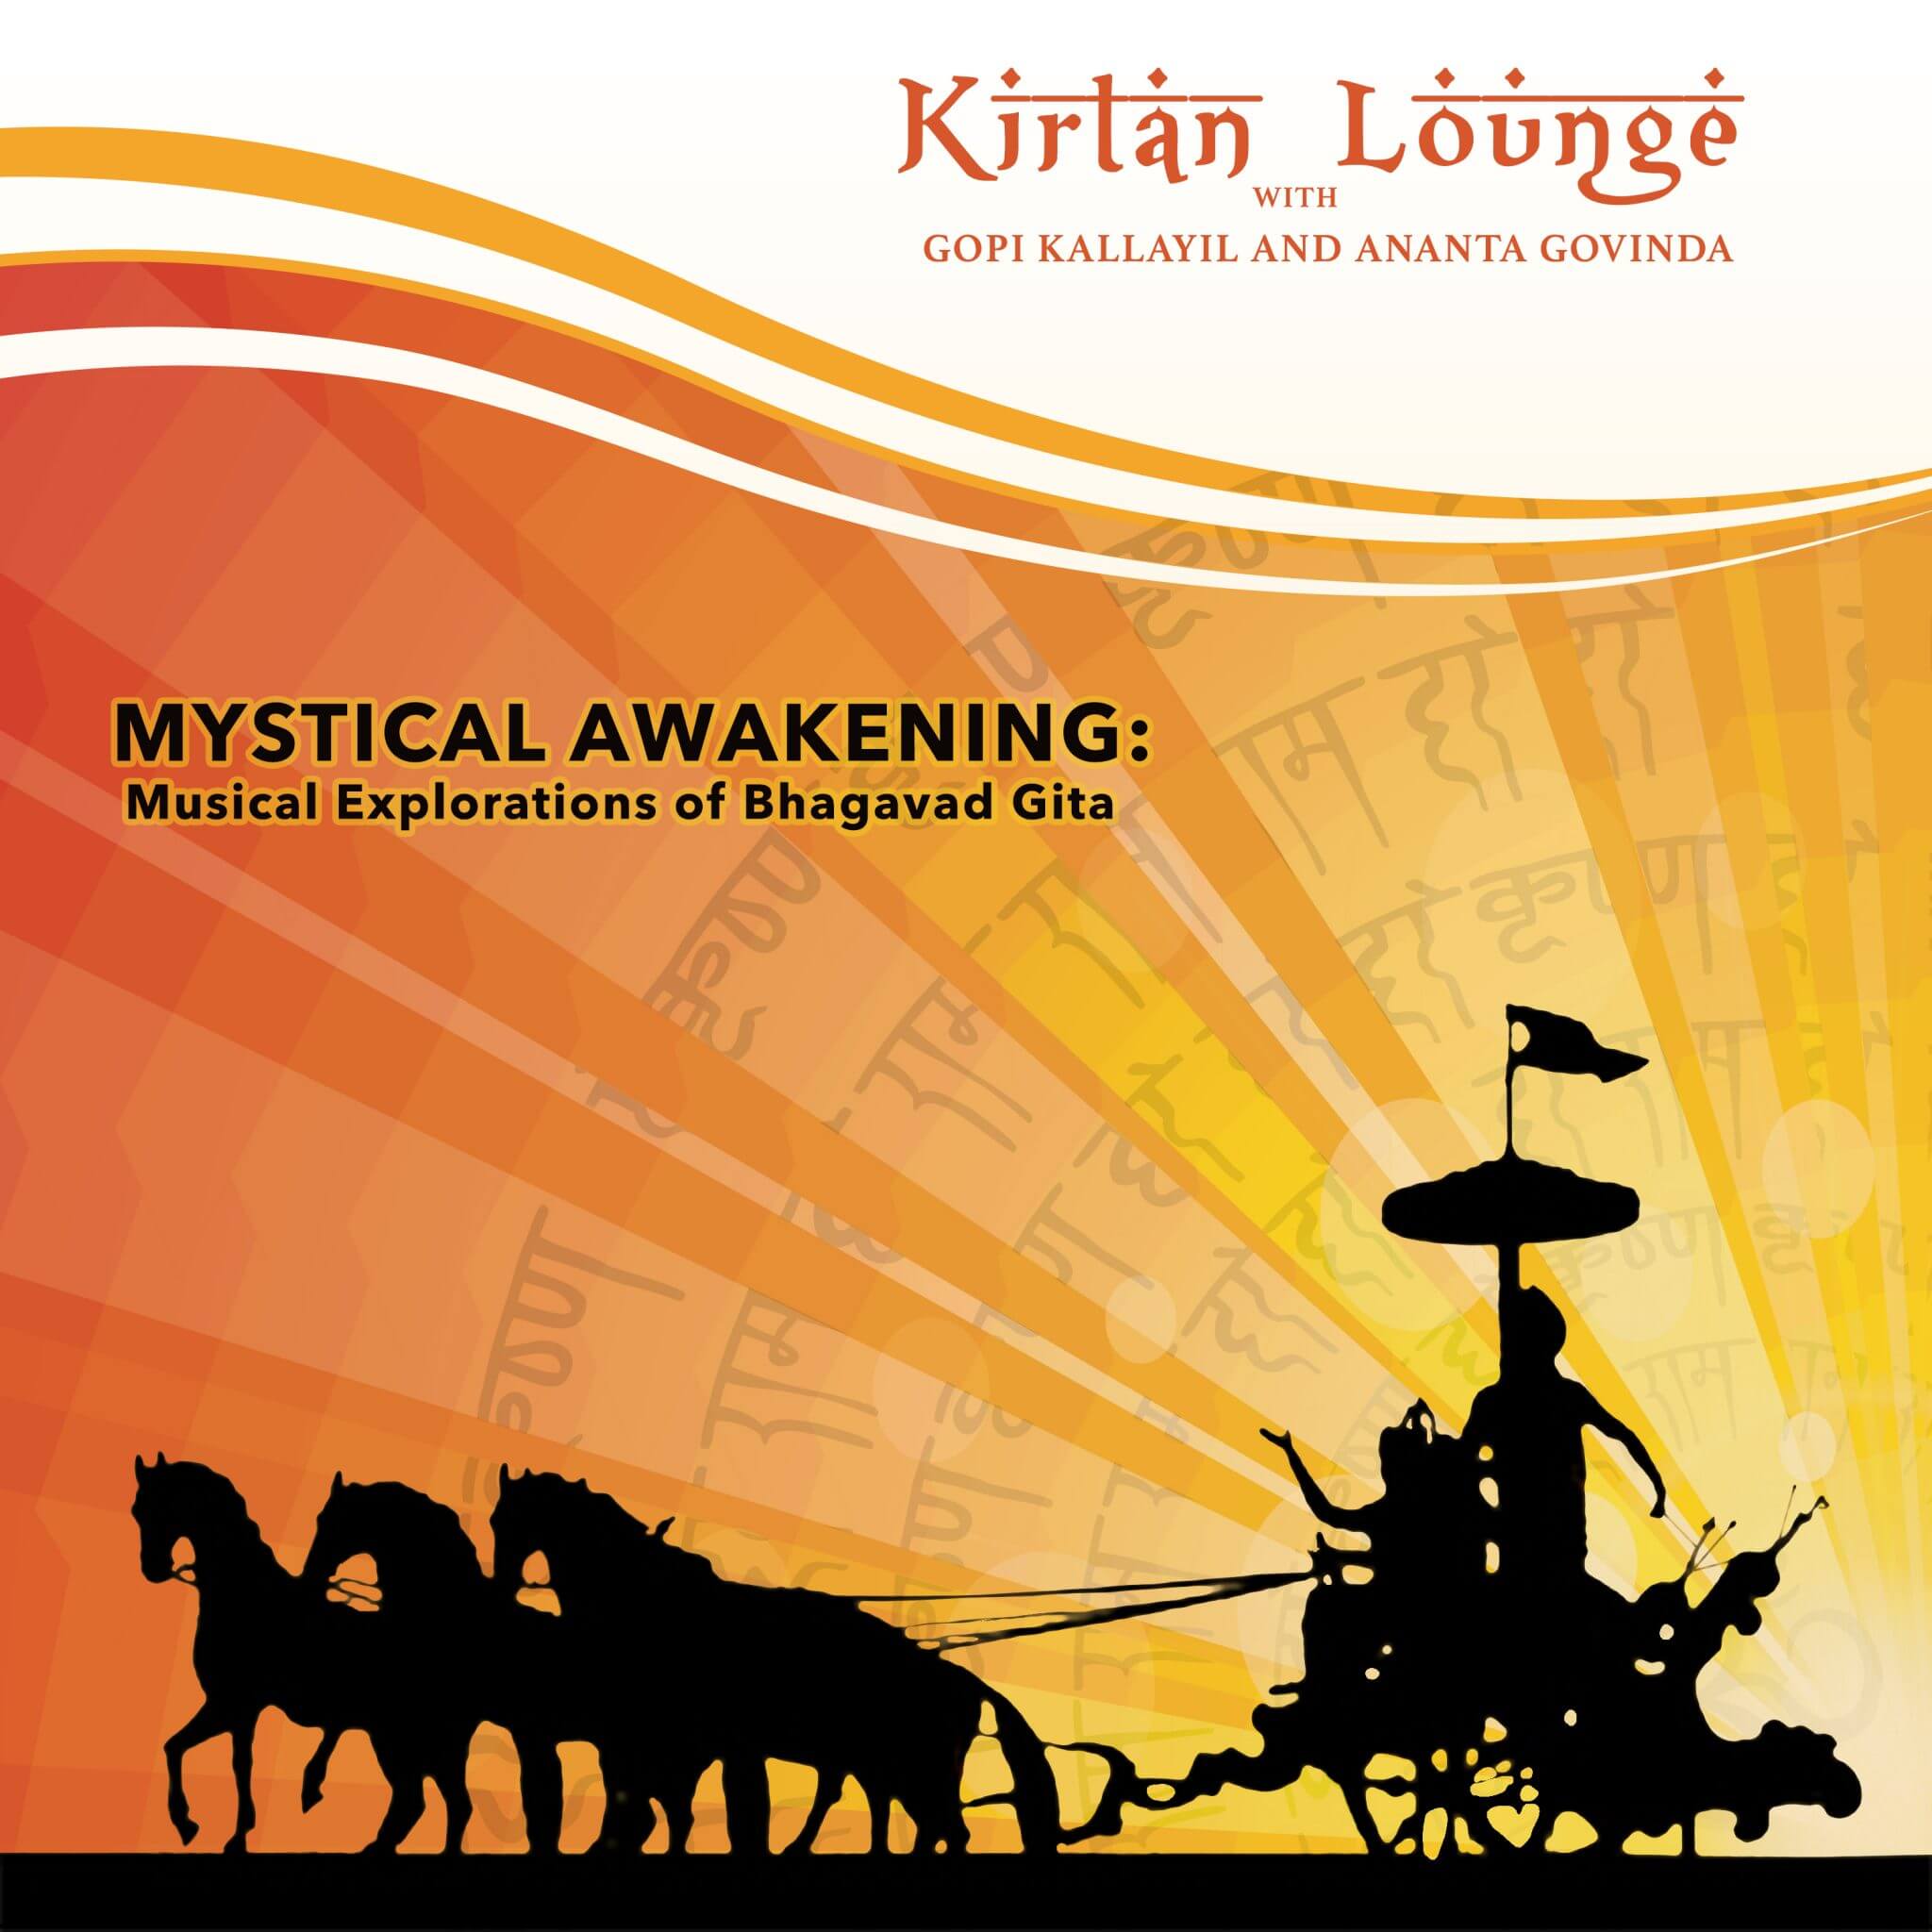 Marvelously soothing magic mantras Kirtan Lounge